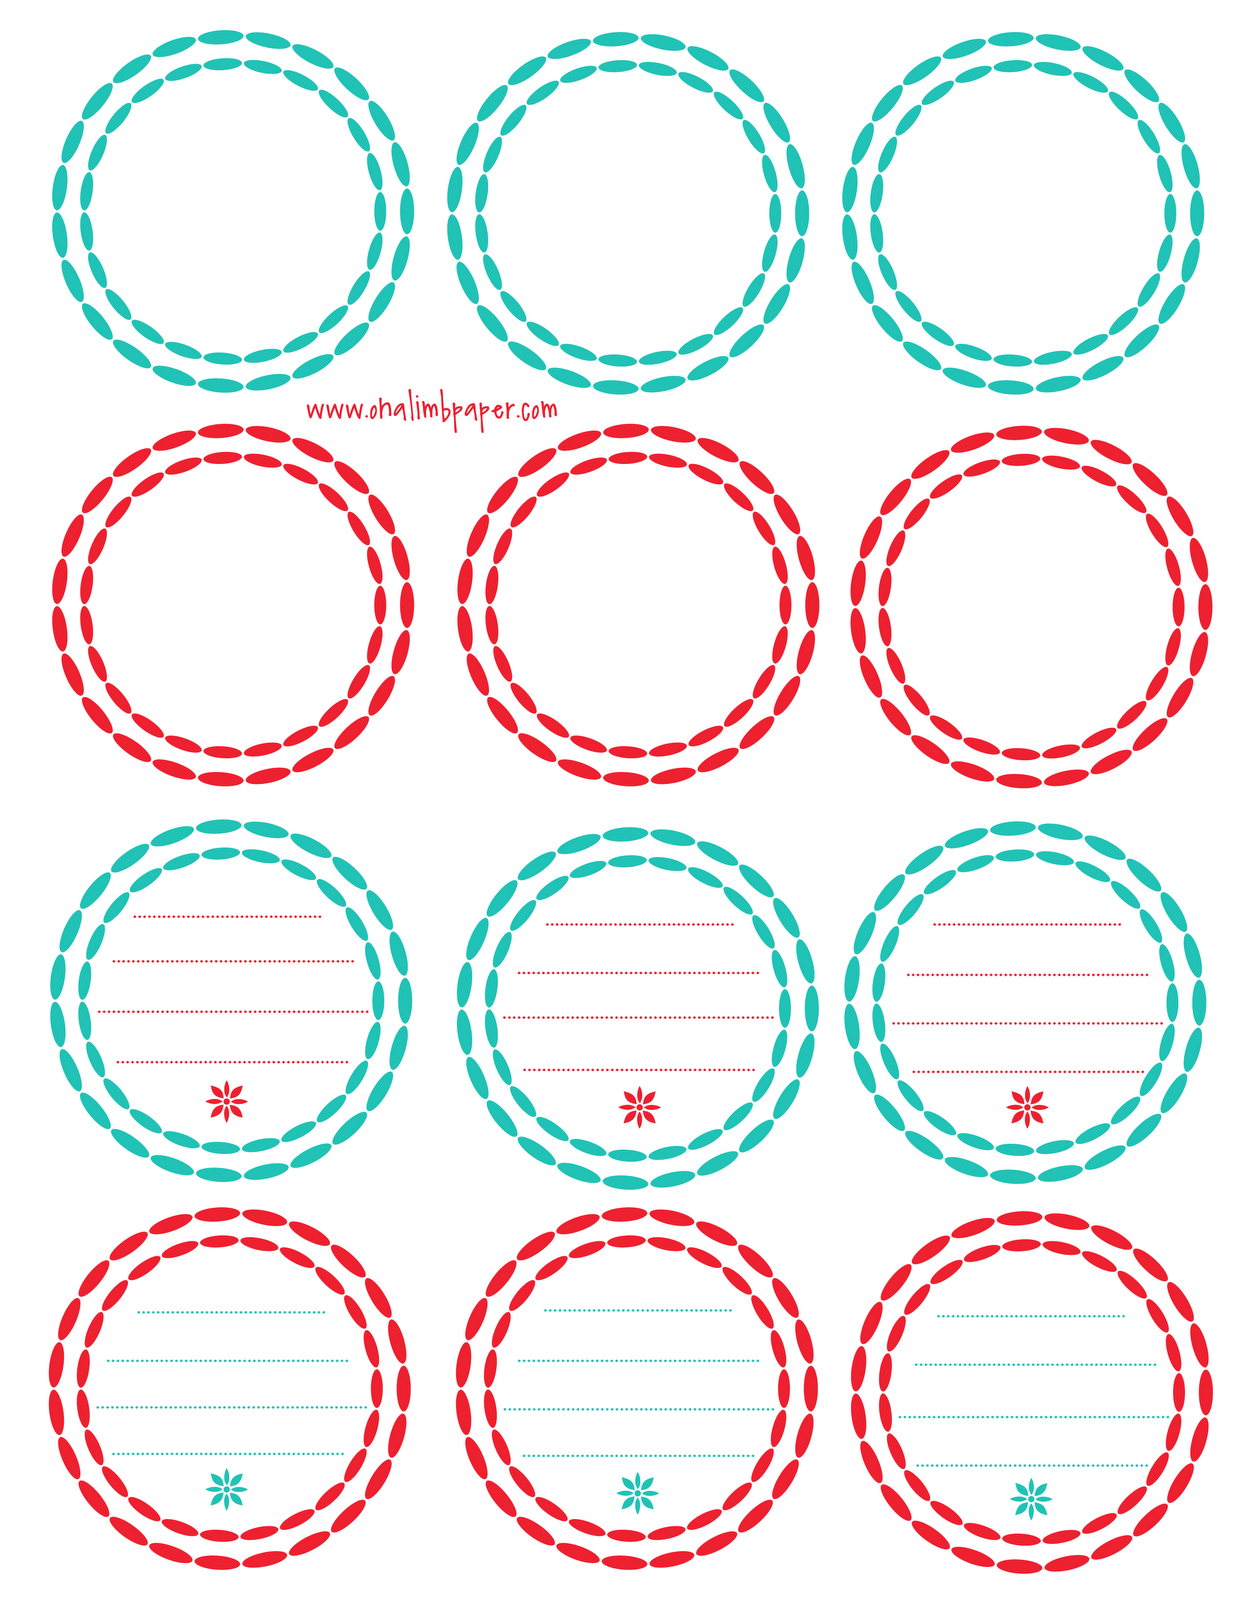 7-best-images-of-round-blank-printable-gift-tags-free-printable-round